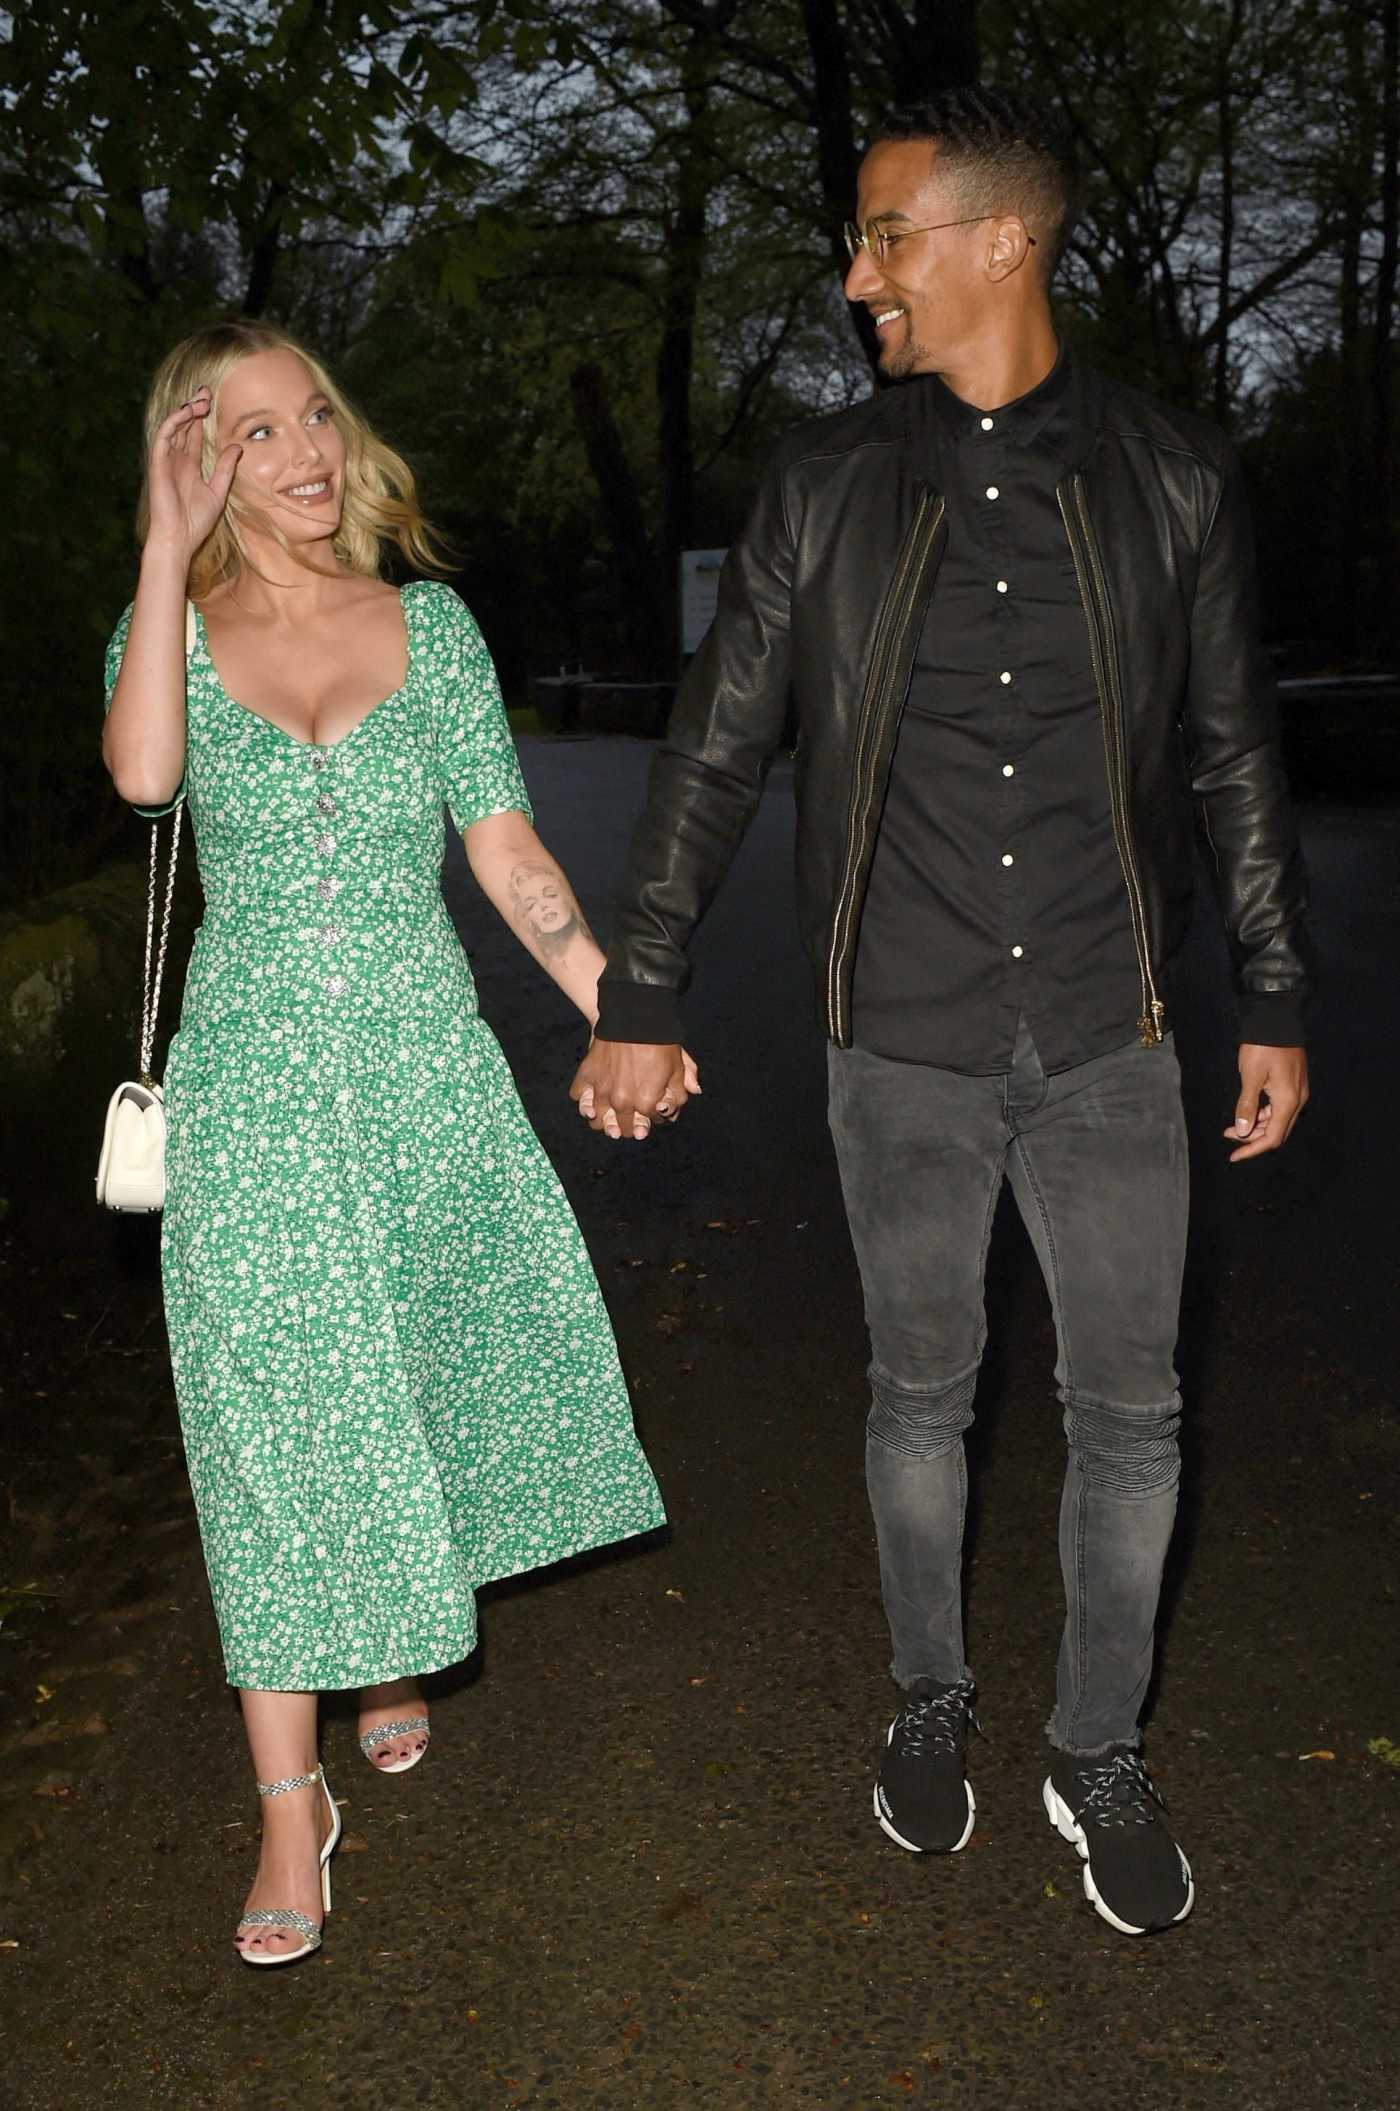 Helen Flanagan in a Green Floral Dress Was Seen Out with Scott Sinclair in Cheshire 05/09/2021